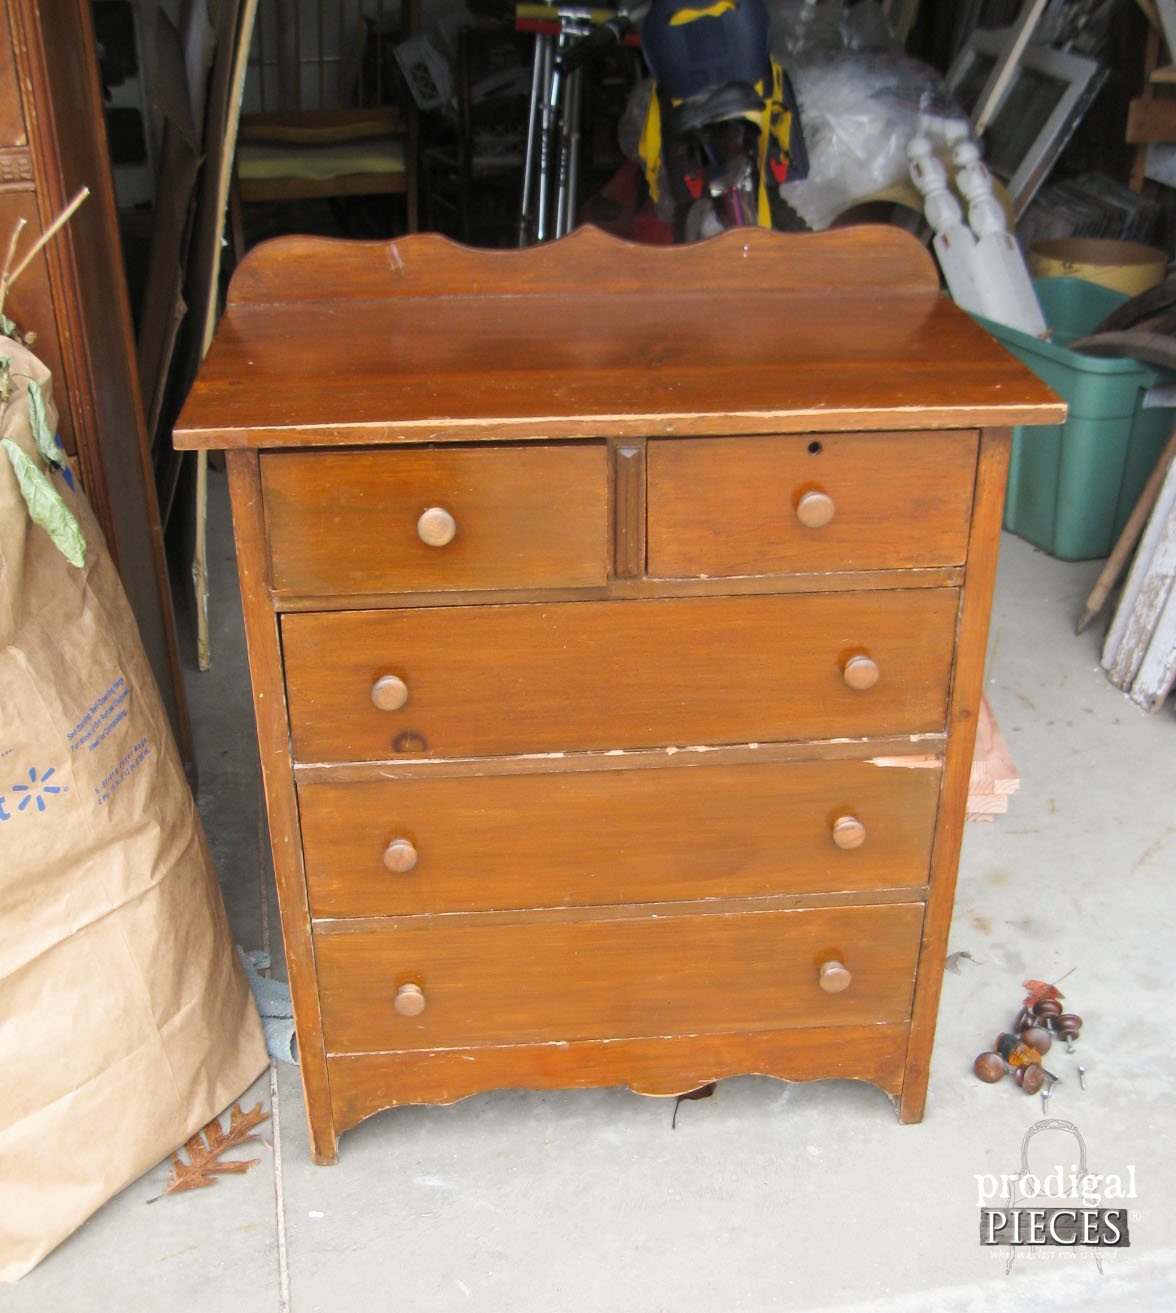 Curbside Find Child's Chest of Drawers Before Made into Card Catalog by Prodigal Pieces | prodigalpieces.com #prodigalpieces